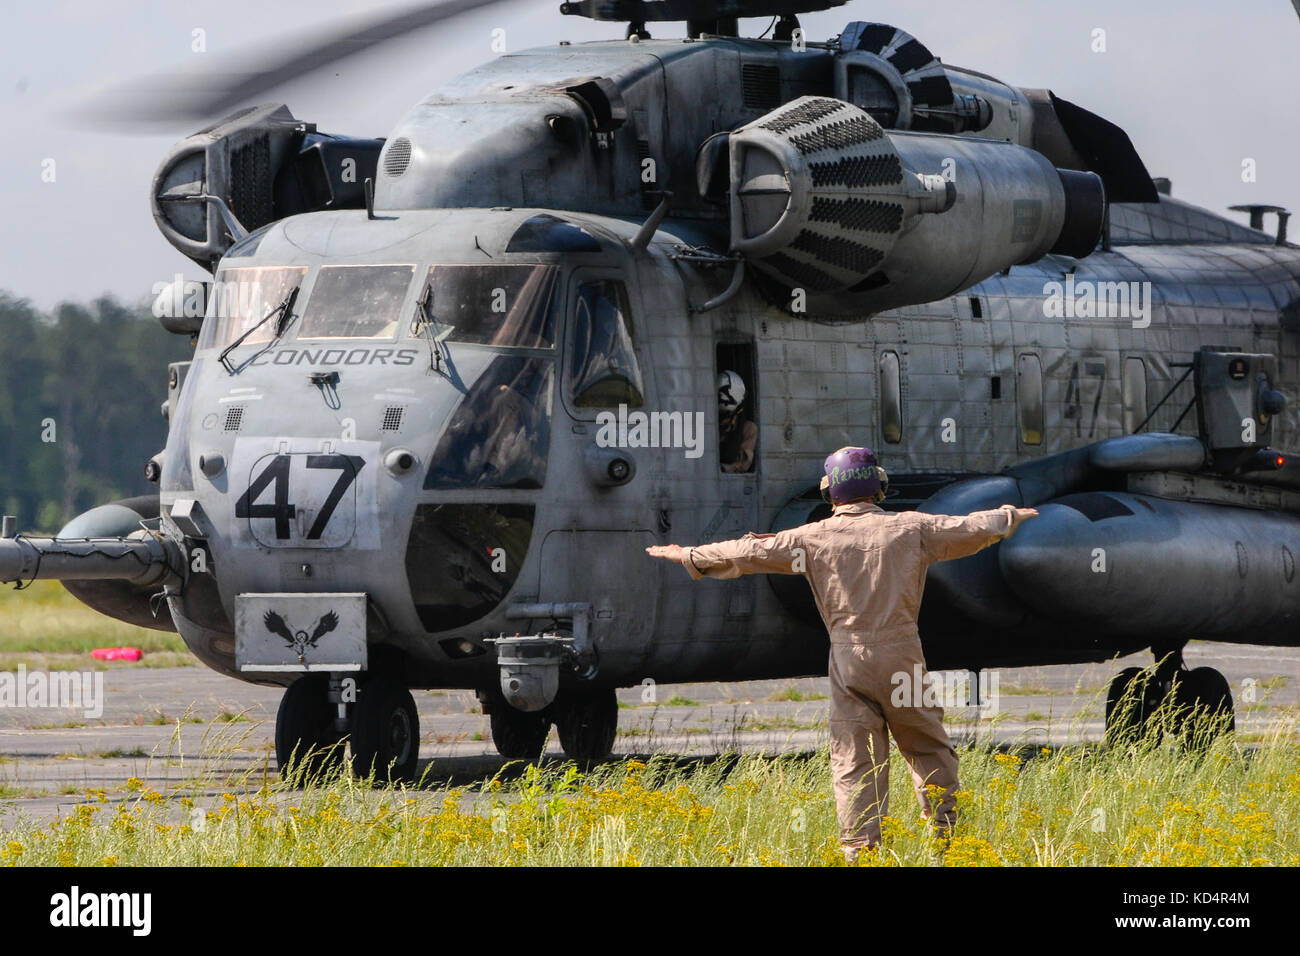 A U.S. Marine assigned to the 273rd Marine Wing Support Squadron, Air Operations Company, marshals a CH-53 Sea Stallion during forward air refueling point operations at McEntire Joint National Guard Base, S.C. on May 14, 2014. Elements of the South Carolina Air and Army National Guard and the U.S. Marines conduct joint operations which are crucial to the ongoing success of operational readiness and deployments around the world.  (U.S. Air National Guard photo by Tech Sgt. Jorge Intriago/Released) Stock Photo